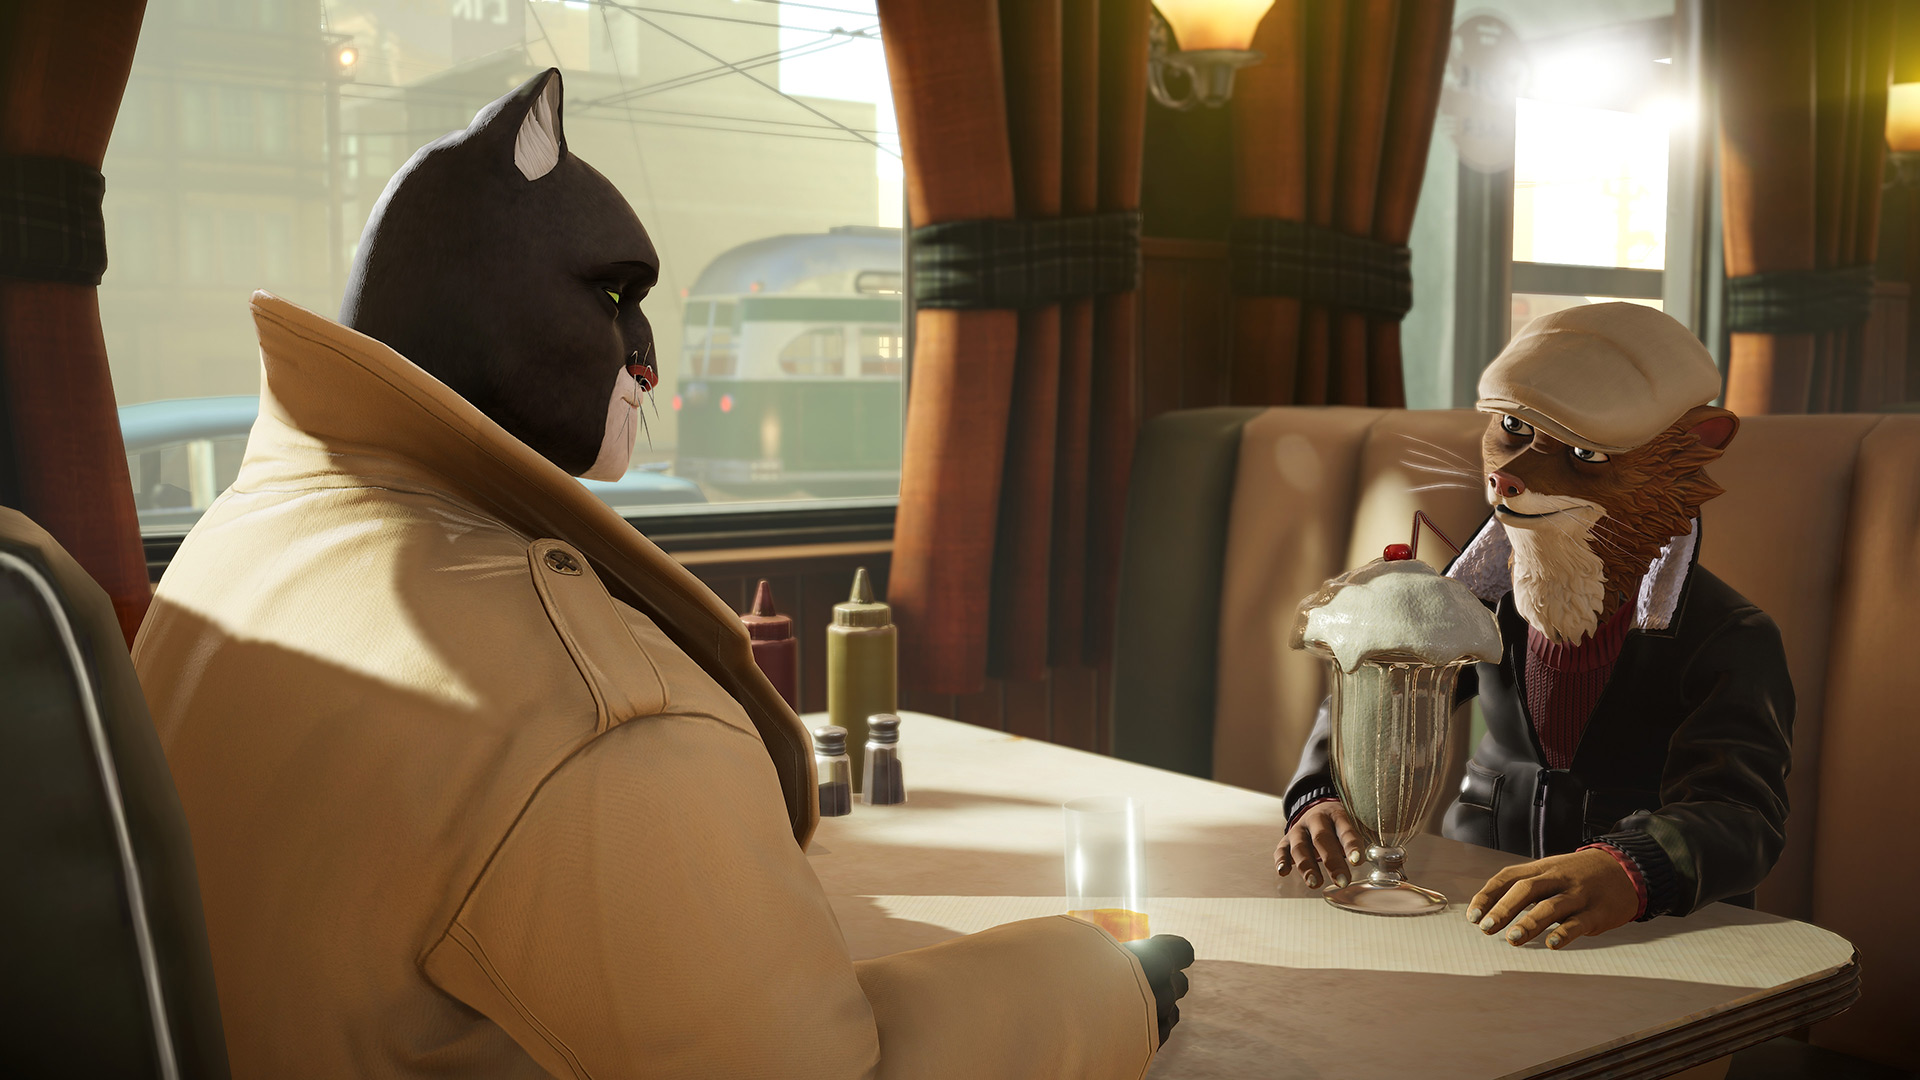 Blacksad: Under the Skin is part of the Intrigue Bundle on Fanatical